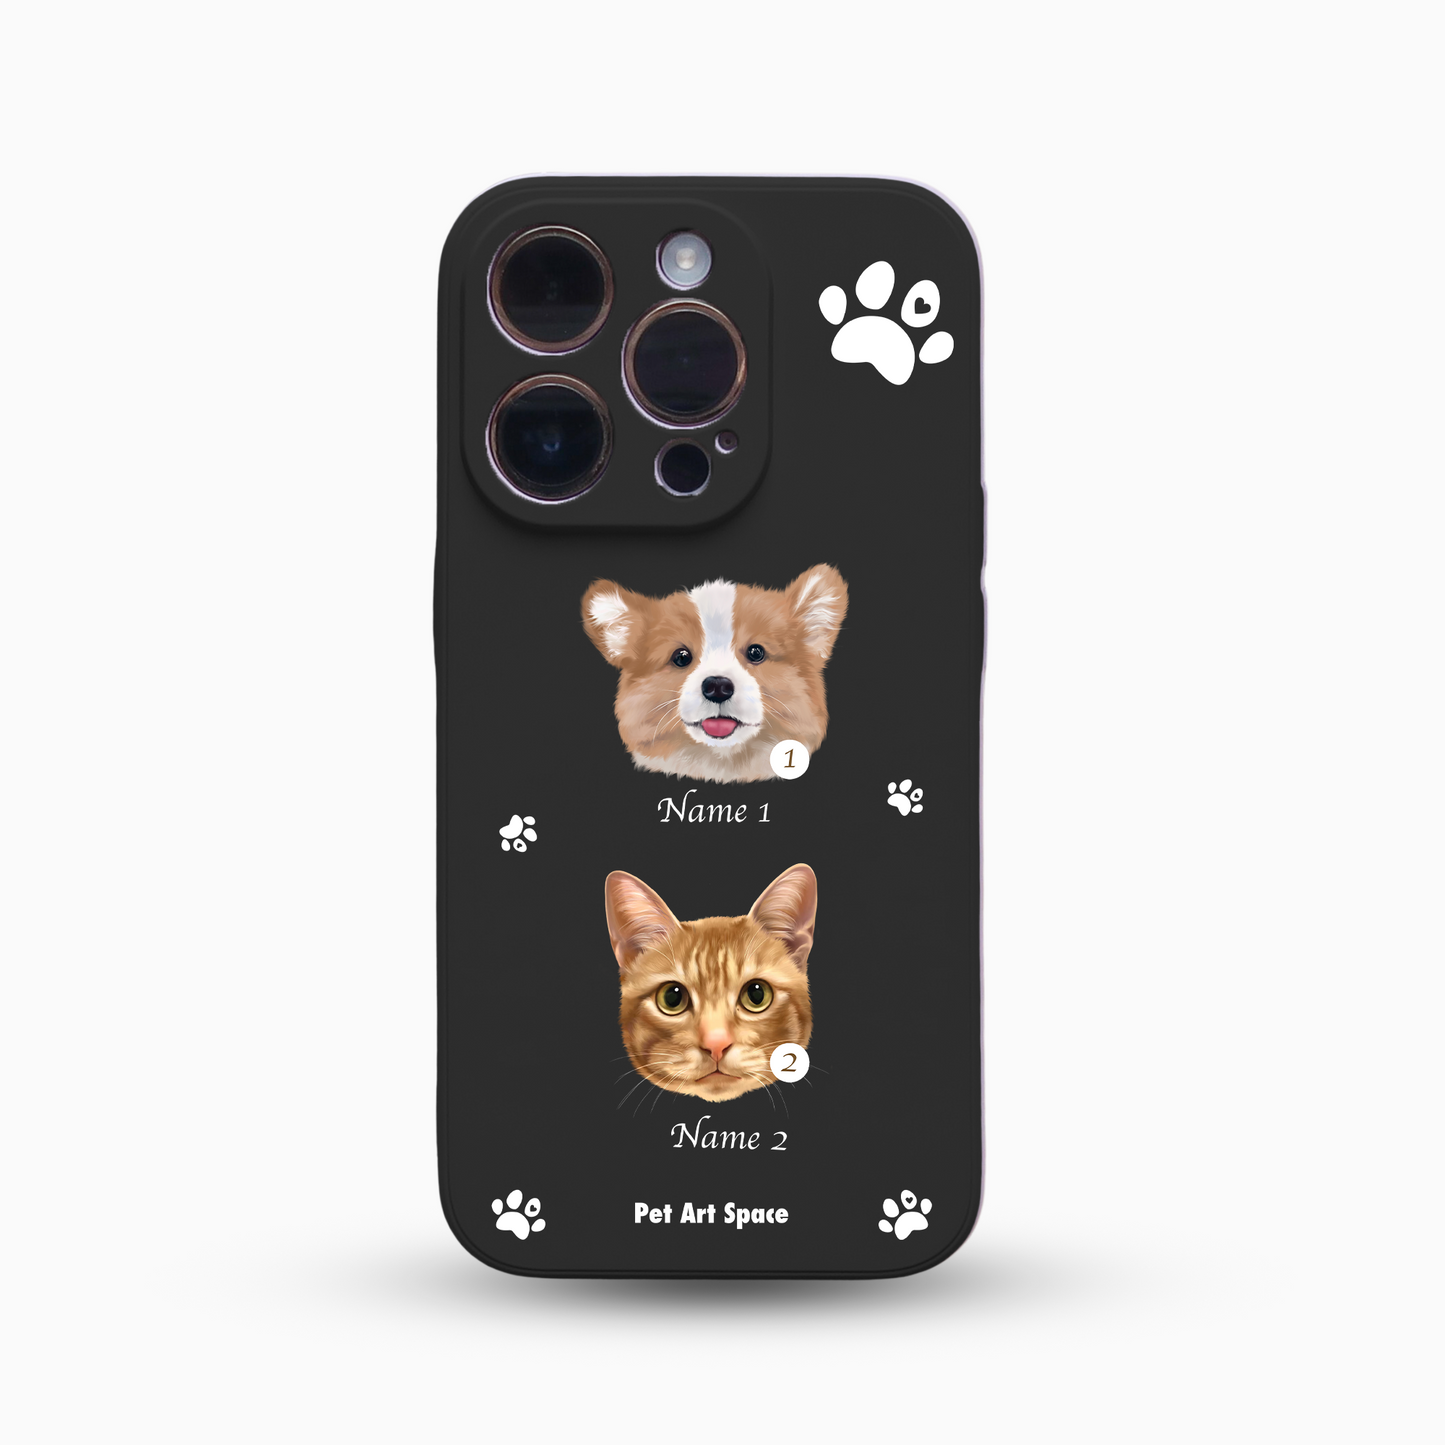 Paws B for 2 pets - Silicone Case - Black